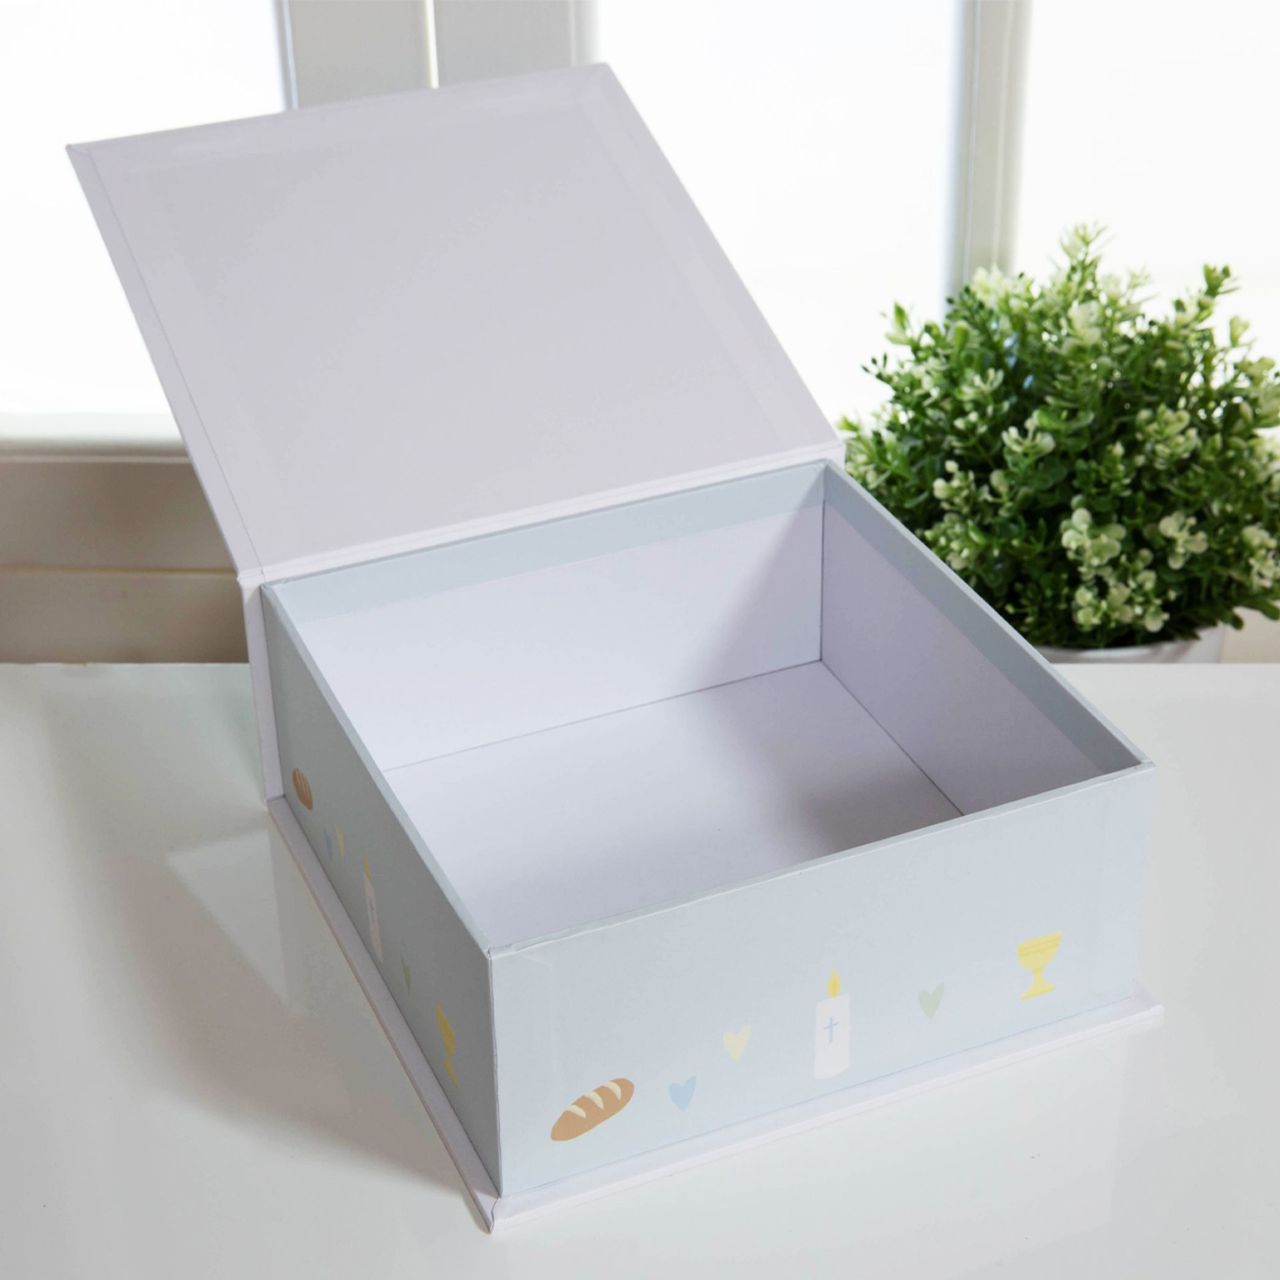 Preserve precious memories, moments and trinkets from his FIRST HOLY COMMUNION with this adorable pink keepsake box.